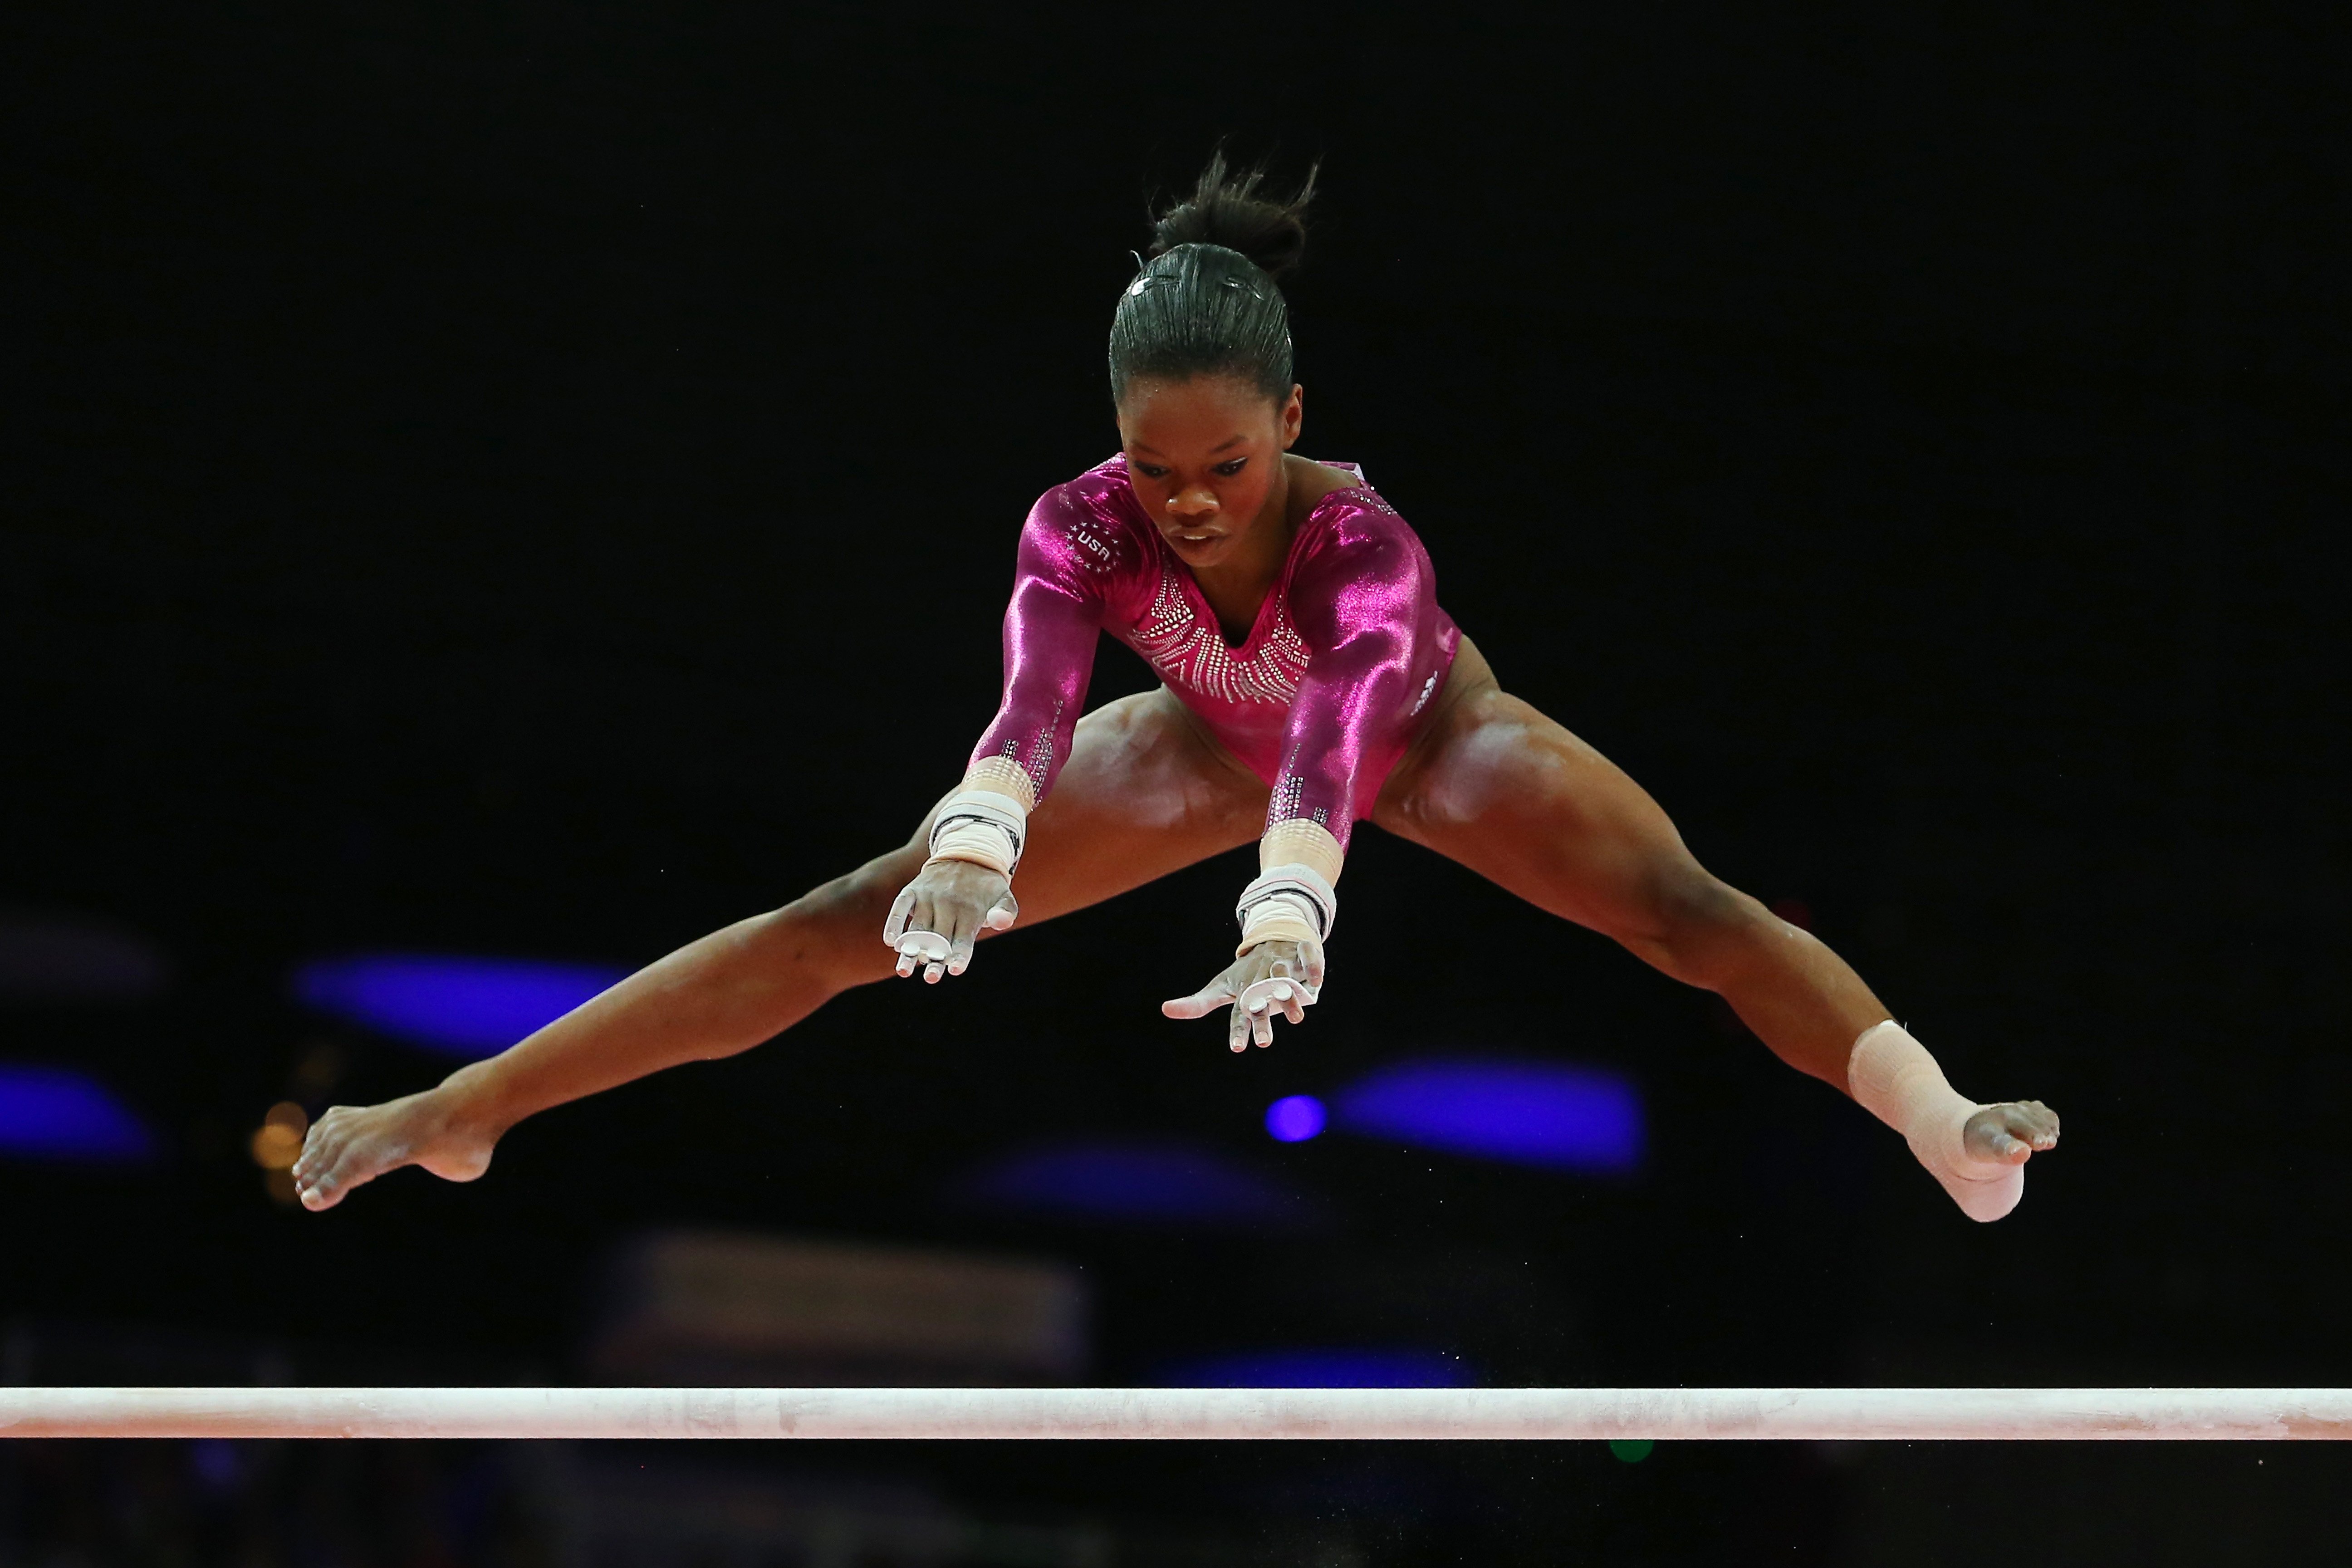 Gymnastics wallpapers HD  Download Free backgrounds